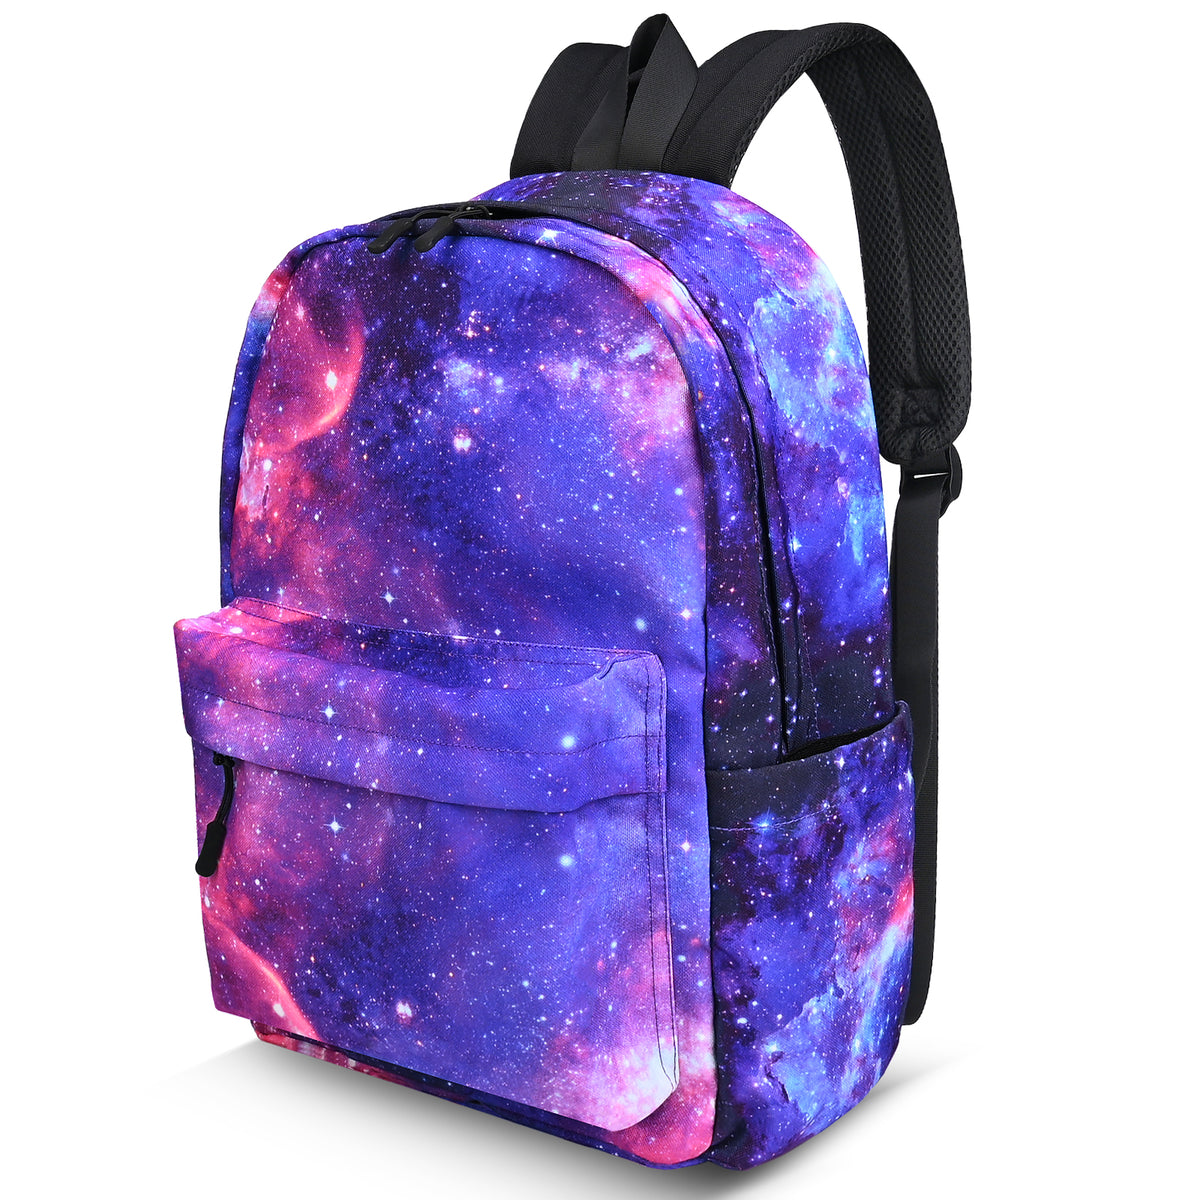 Canvas Backpack ,Washable Recycle Cotton 15.8 Inch Backpack for Women Fashion,Backpack for School(Starry Sky)